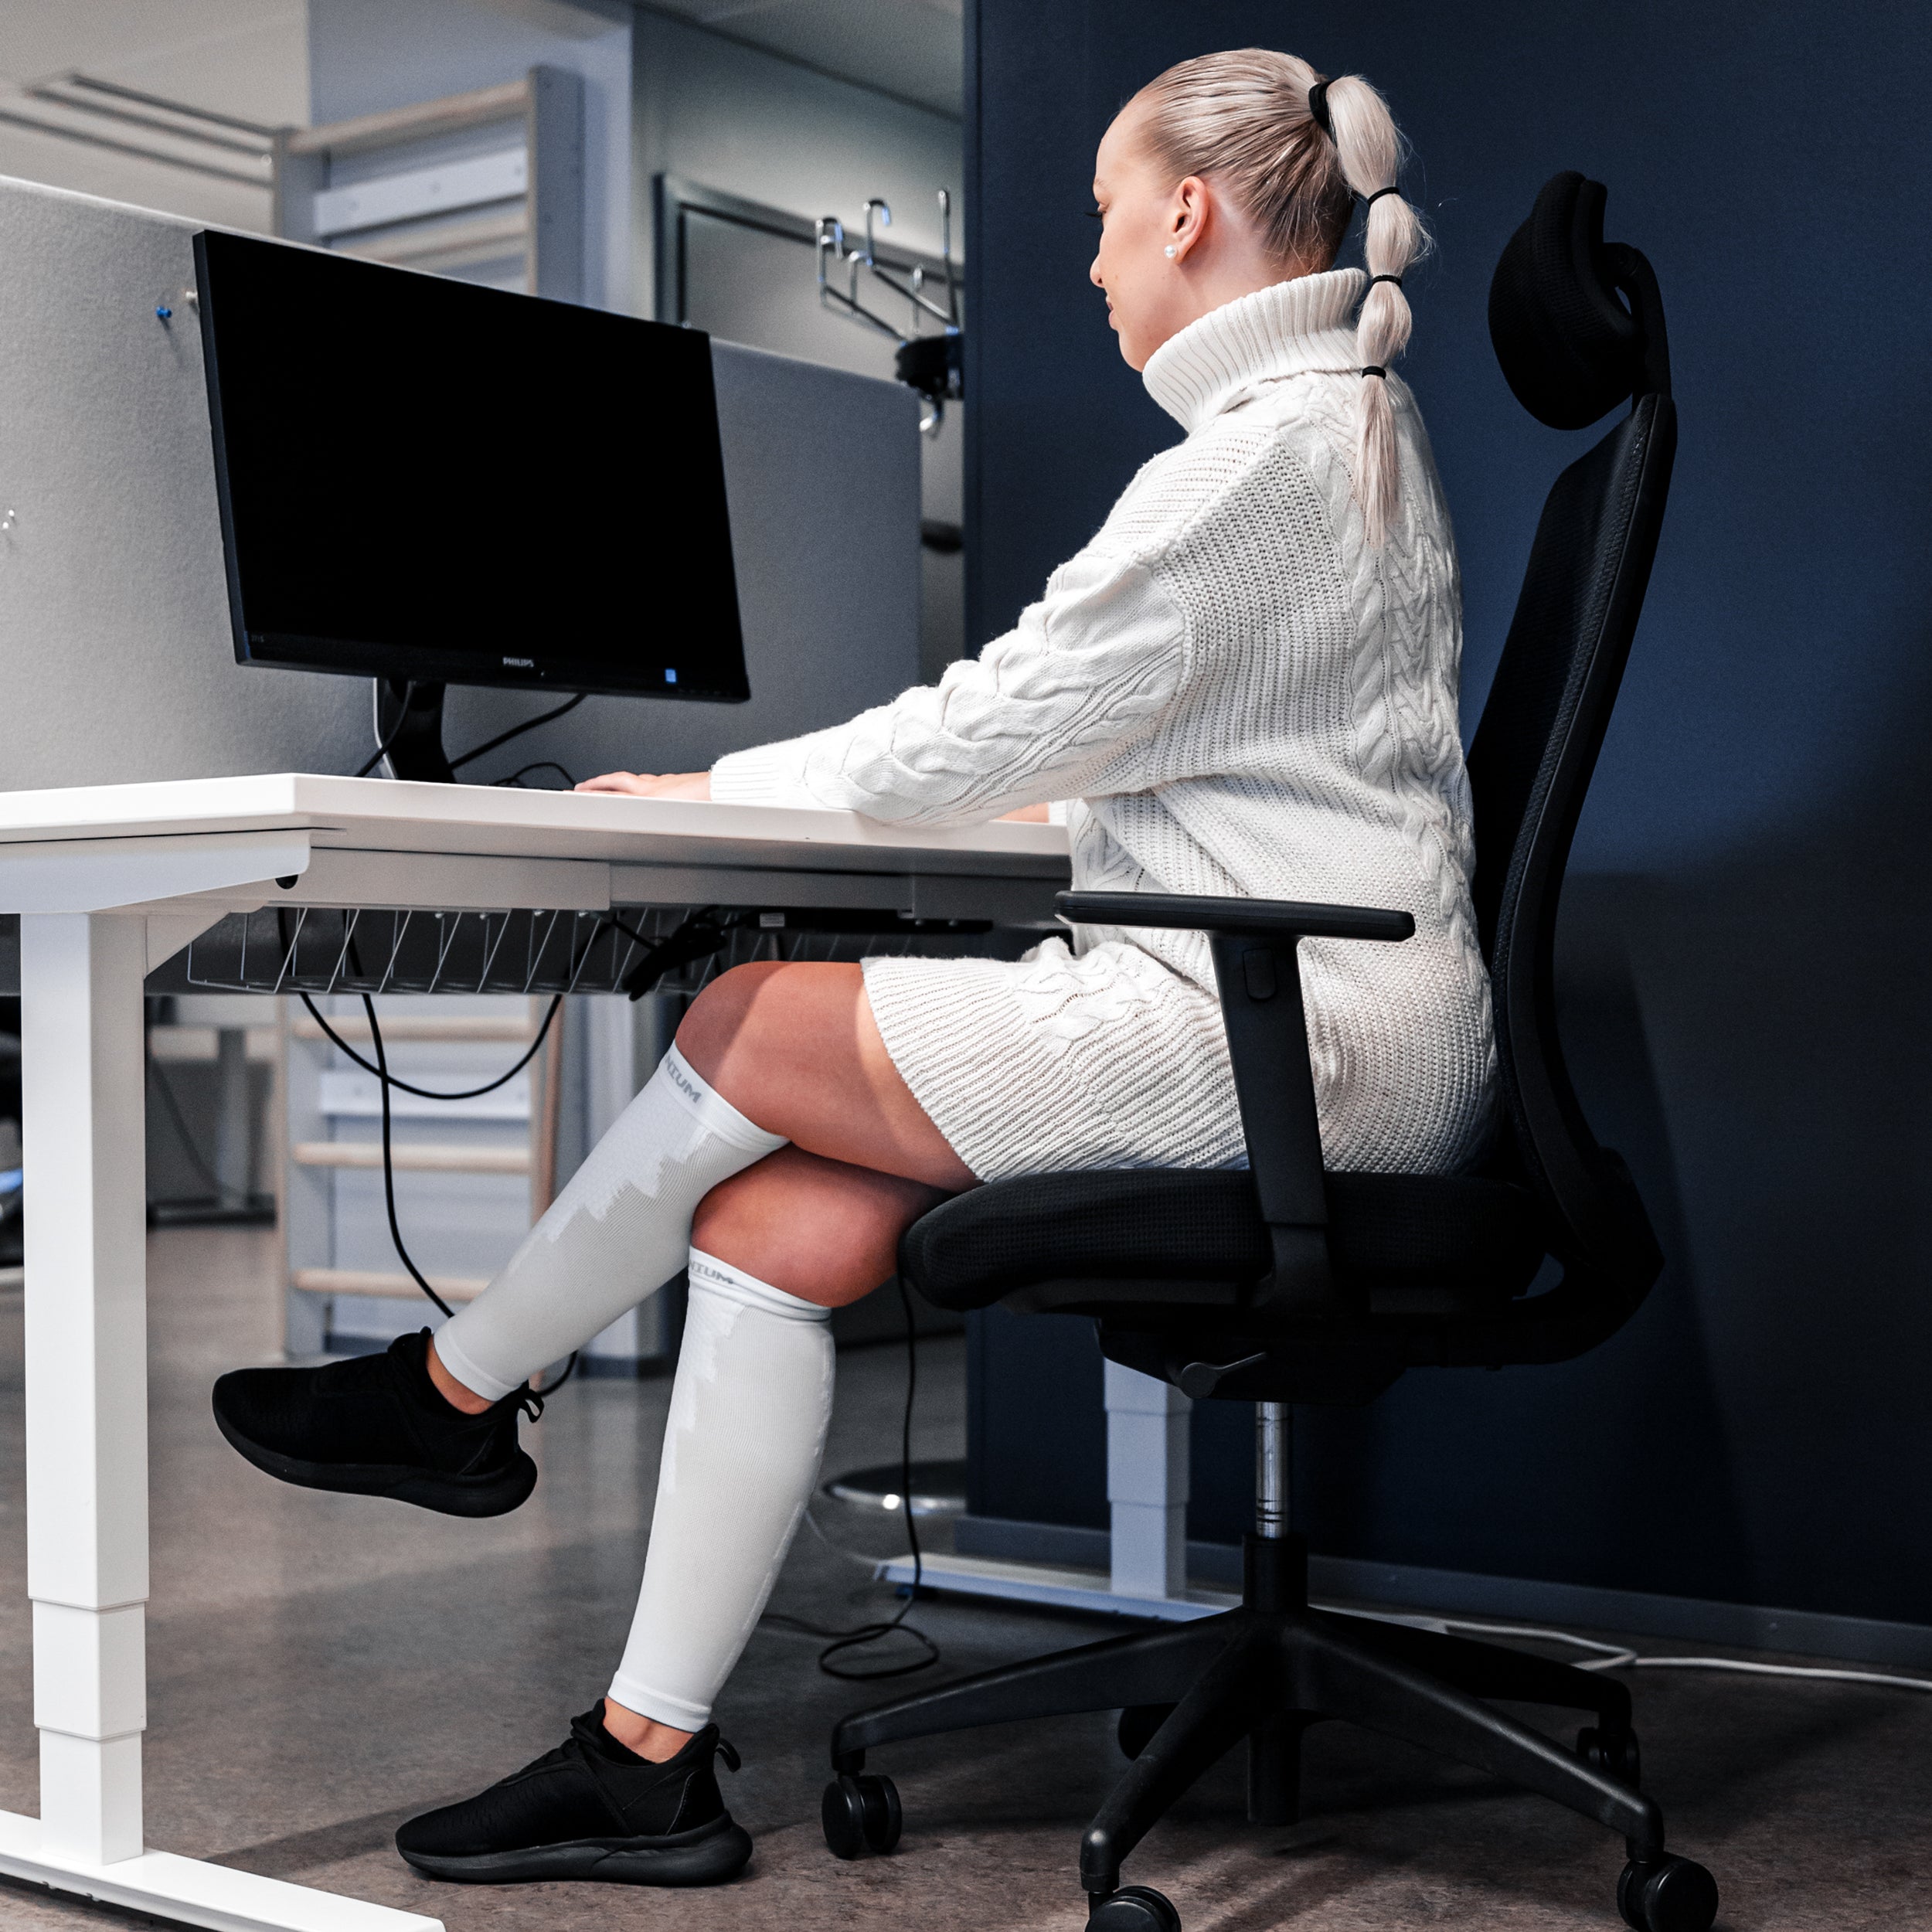 Tritanium eXtend Low Compression Leg Sleeves for Work and Travel